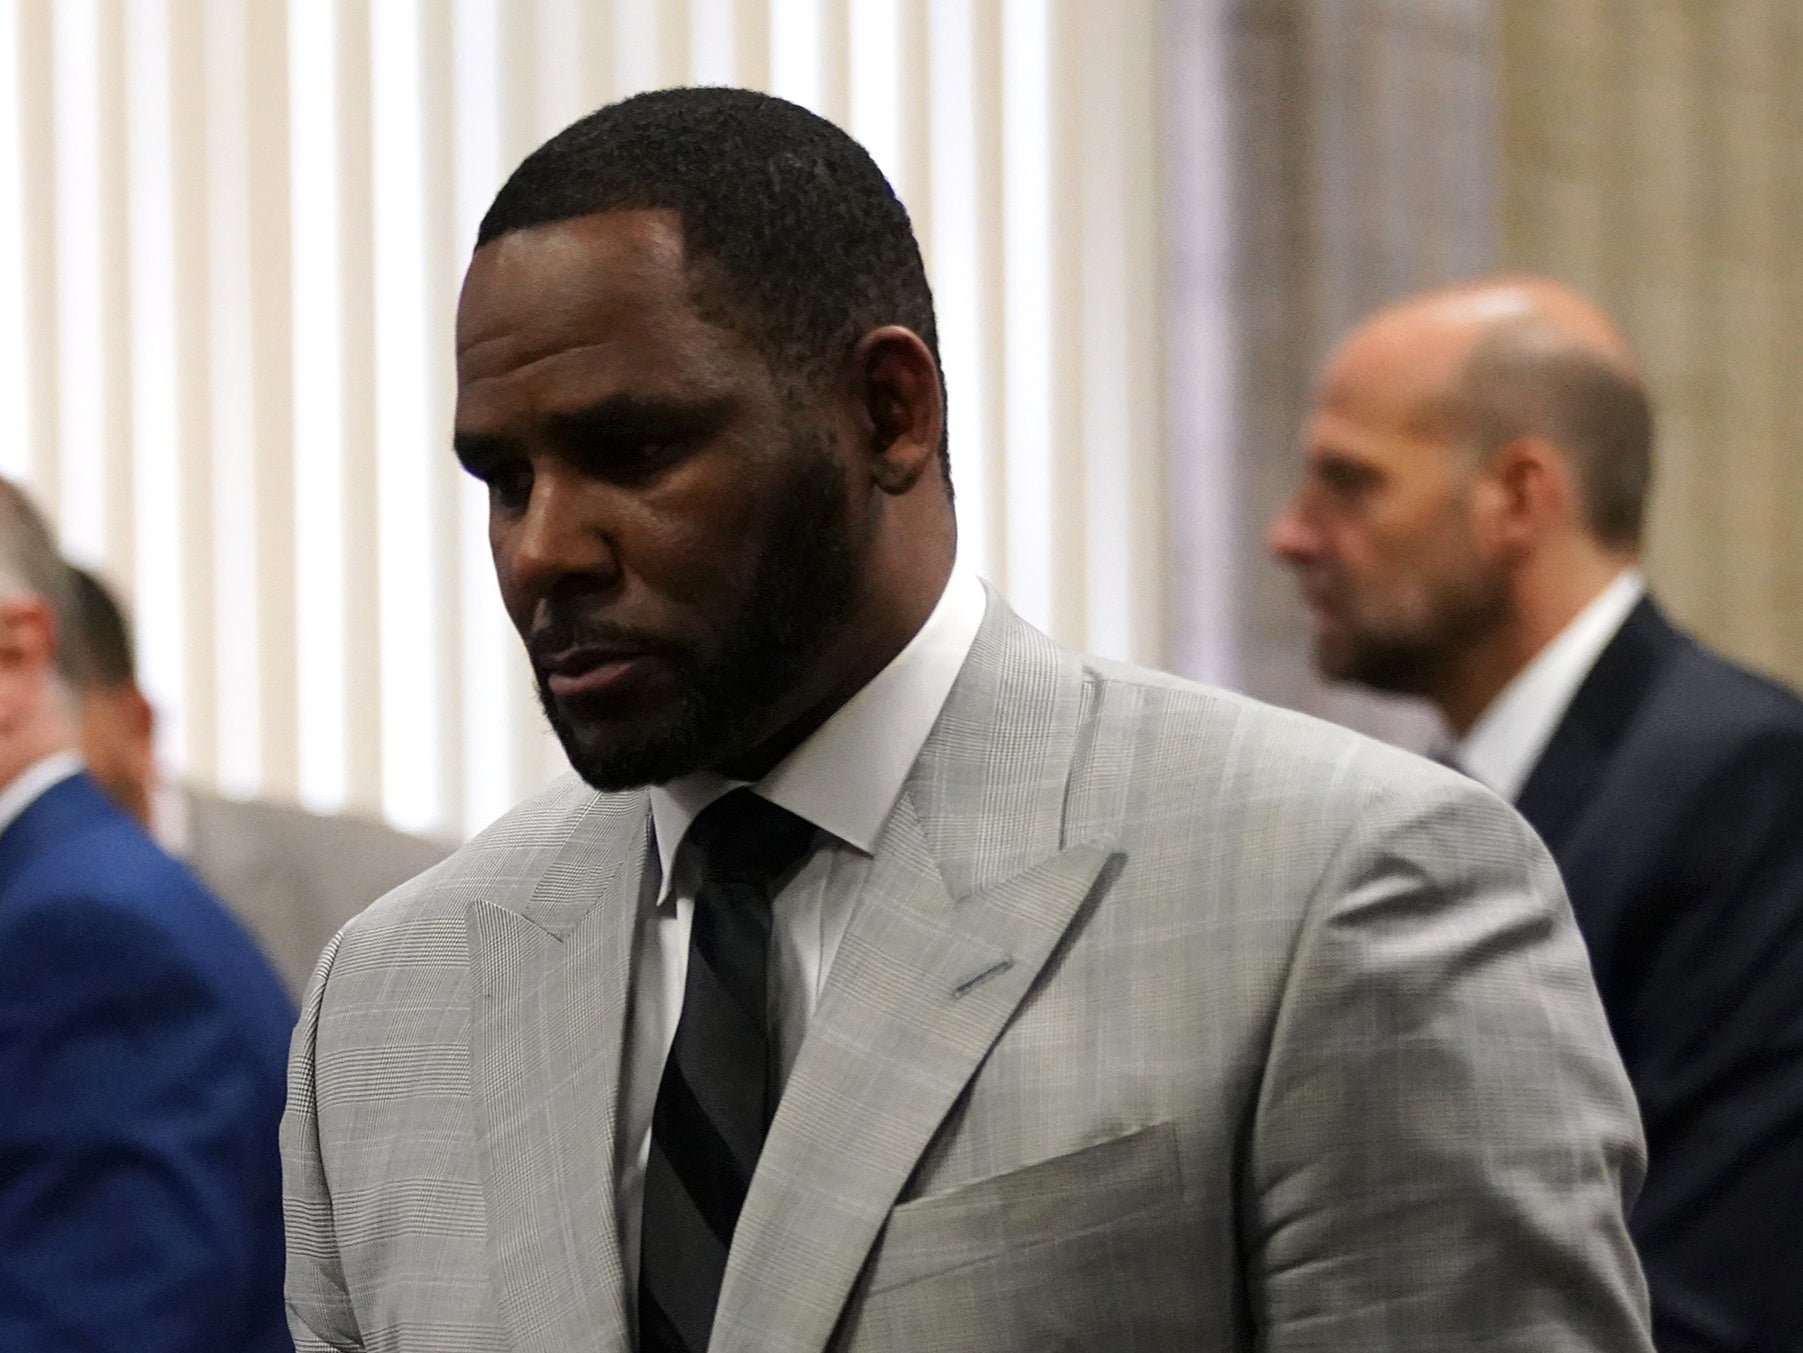 R Kelly pleads not guilty to a new indictment before Judge Lawrence Flood at Leighton Criminal Court Building in Chicago, Illinois, on 6 June 2019